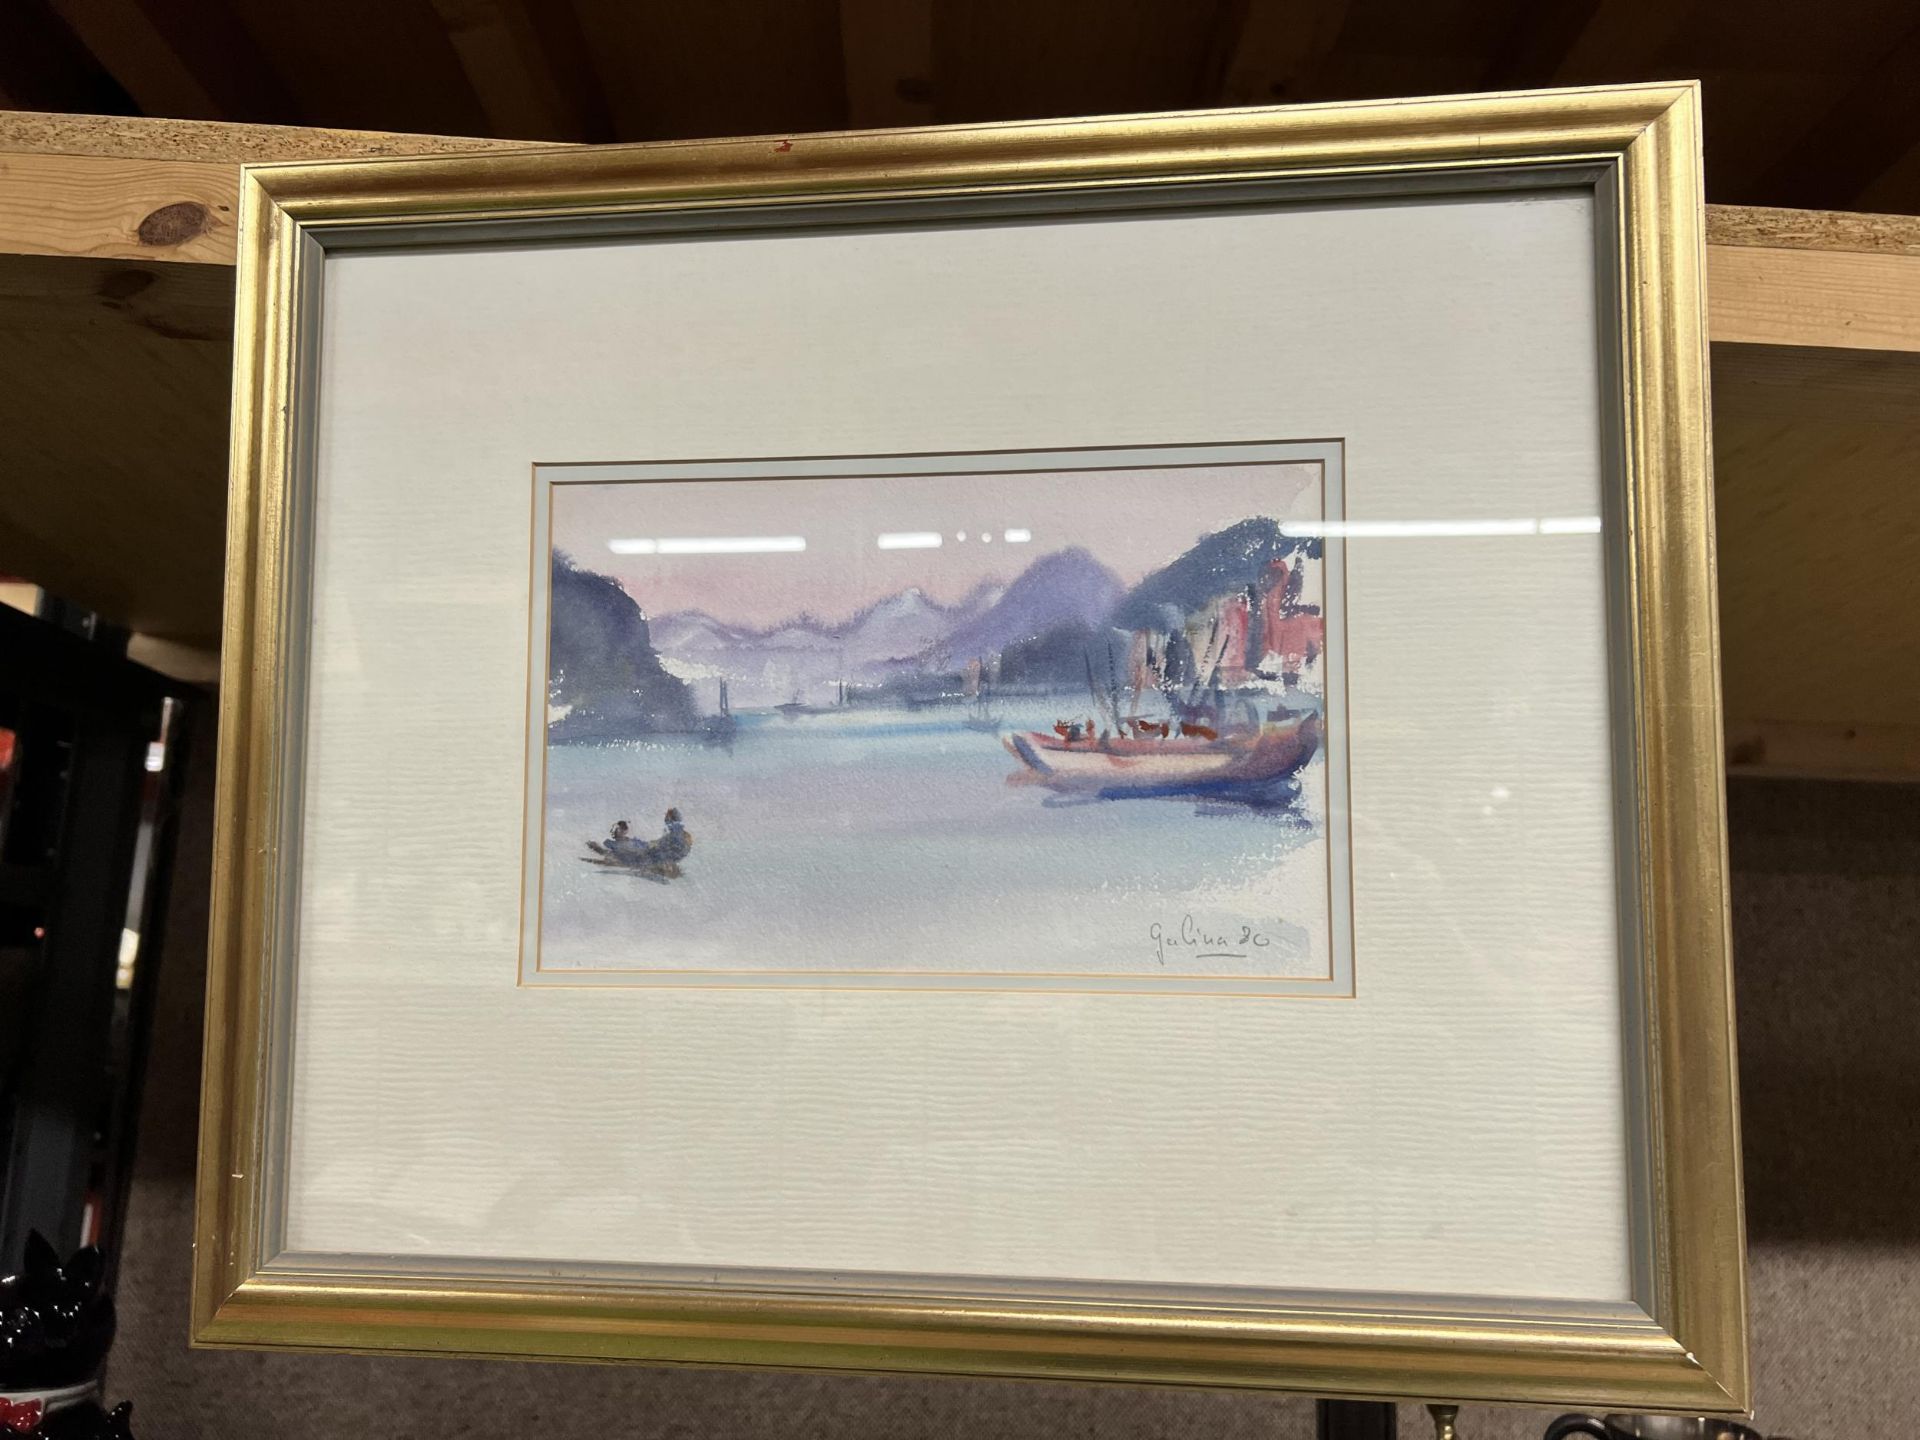 A FRAMED WATERCOLOUR OF A BOAT SCENE WITH MOUNTAINS SIGNED